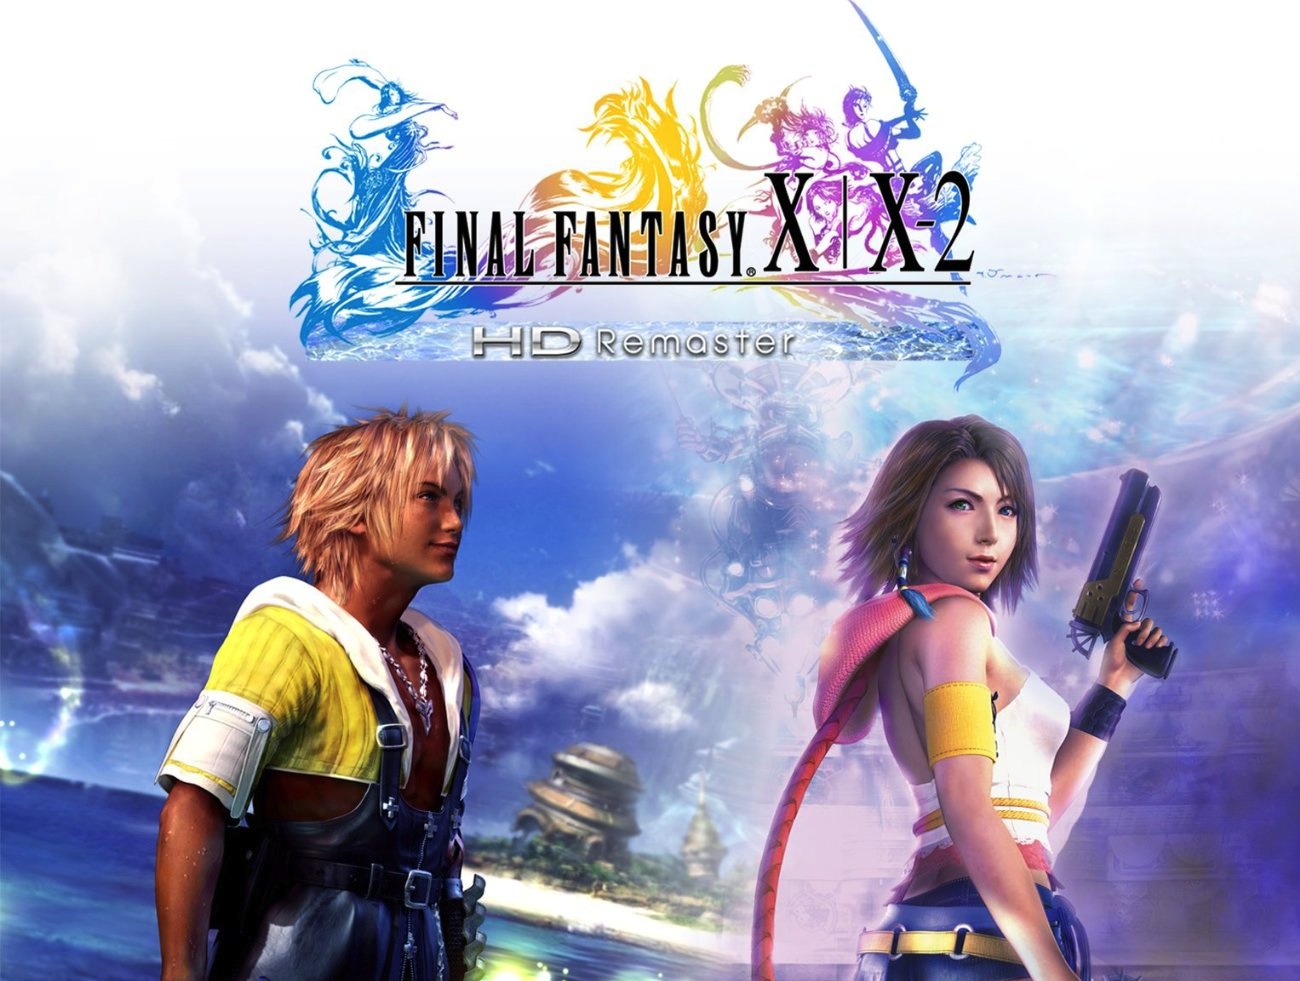 download final fantasy xx 2 hd remaster ps3 for free